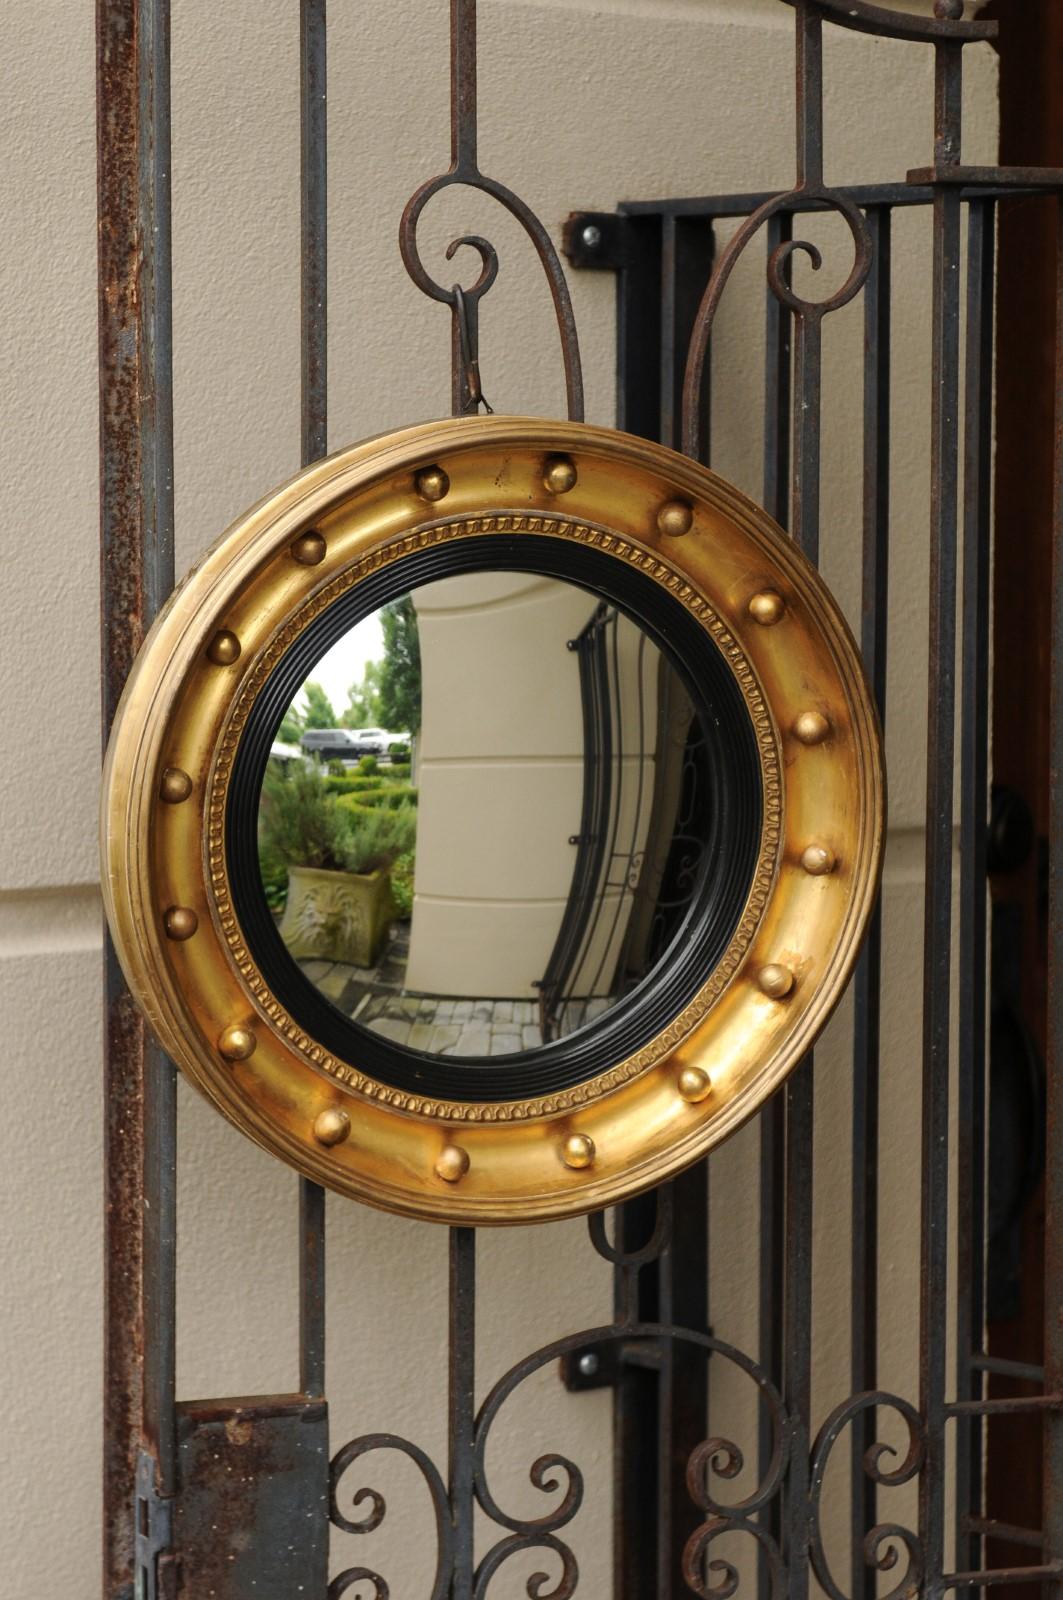 A small English giltwood bull’s-eye convex girandole mirror from the late 19th century with ebonized accents and petite spheres. Born in the later years of the 19th century, this stylish English circular mirror features a convex mirror plate,